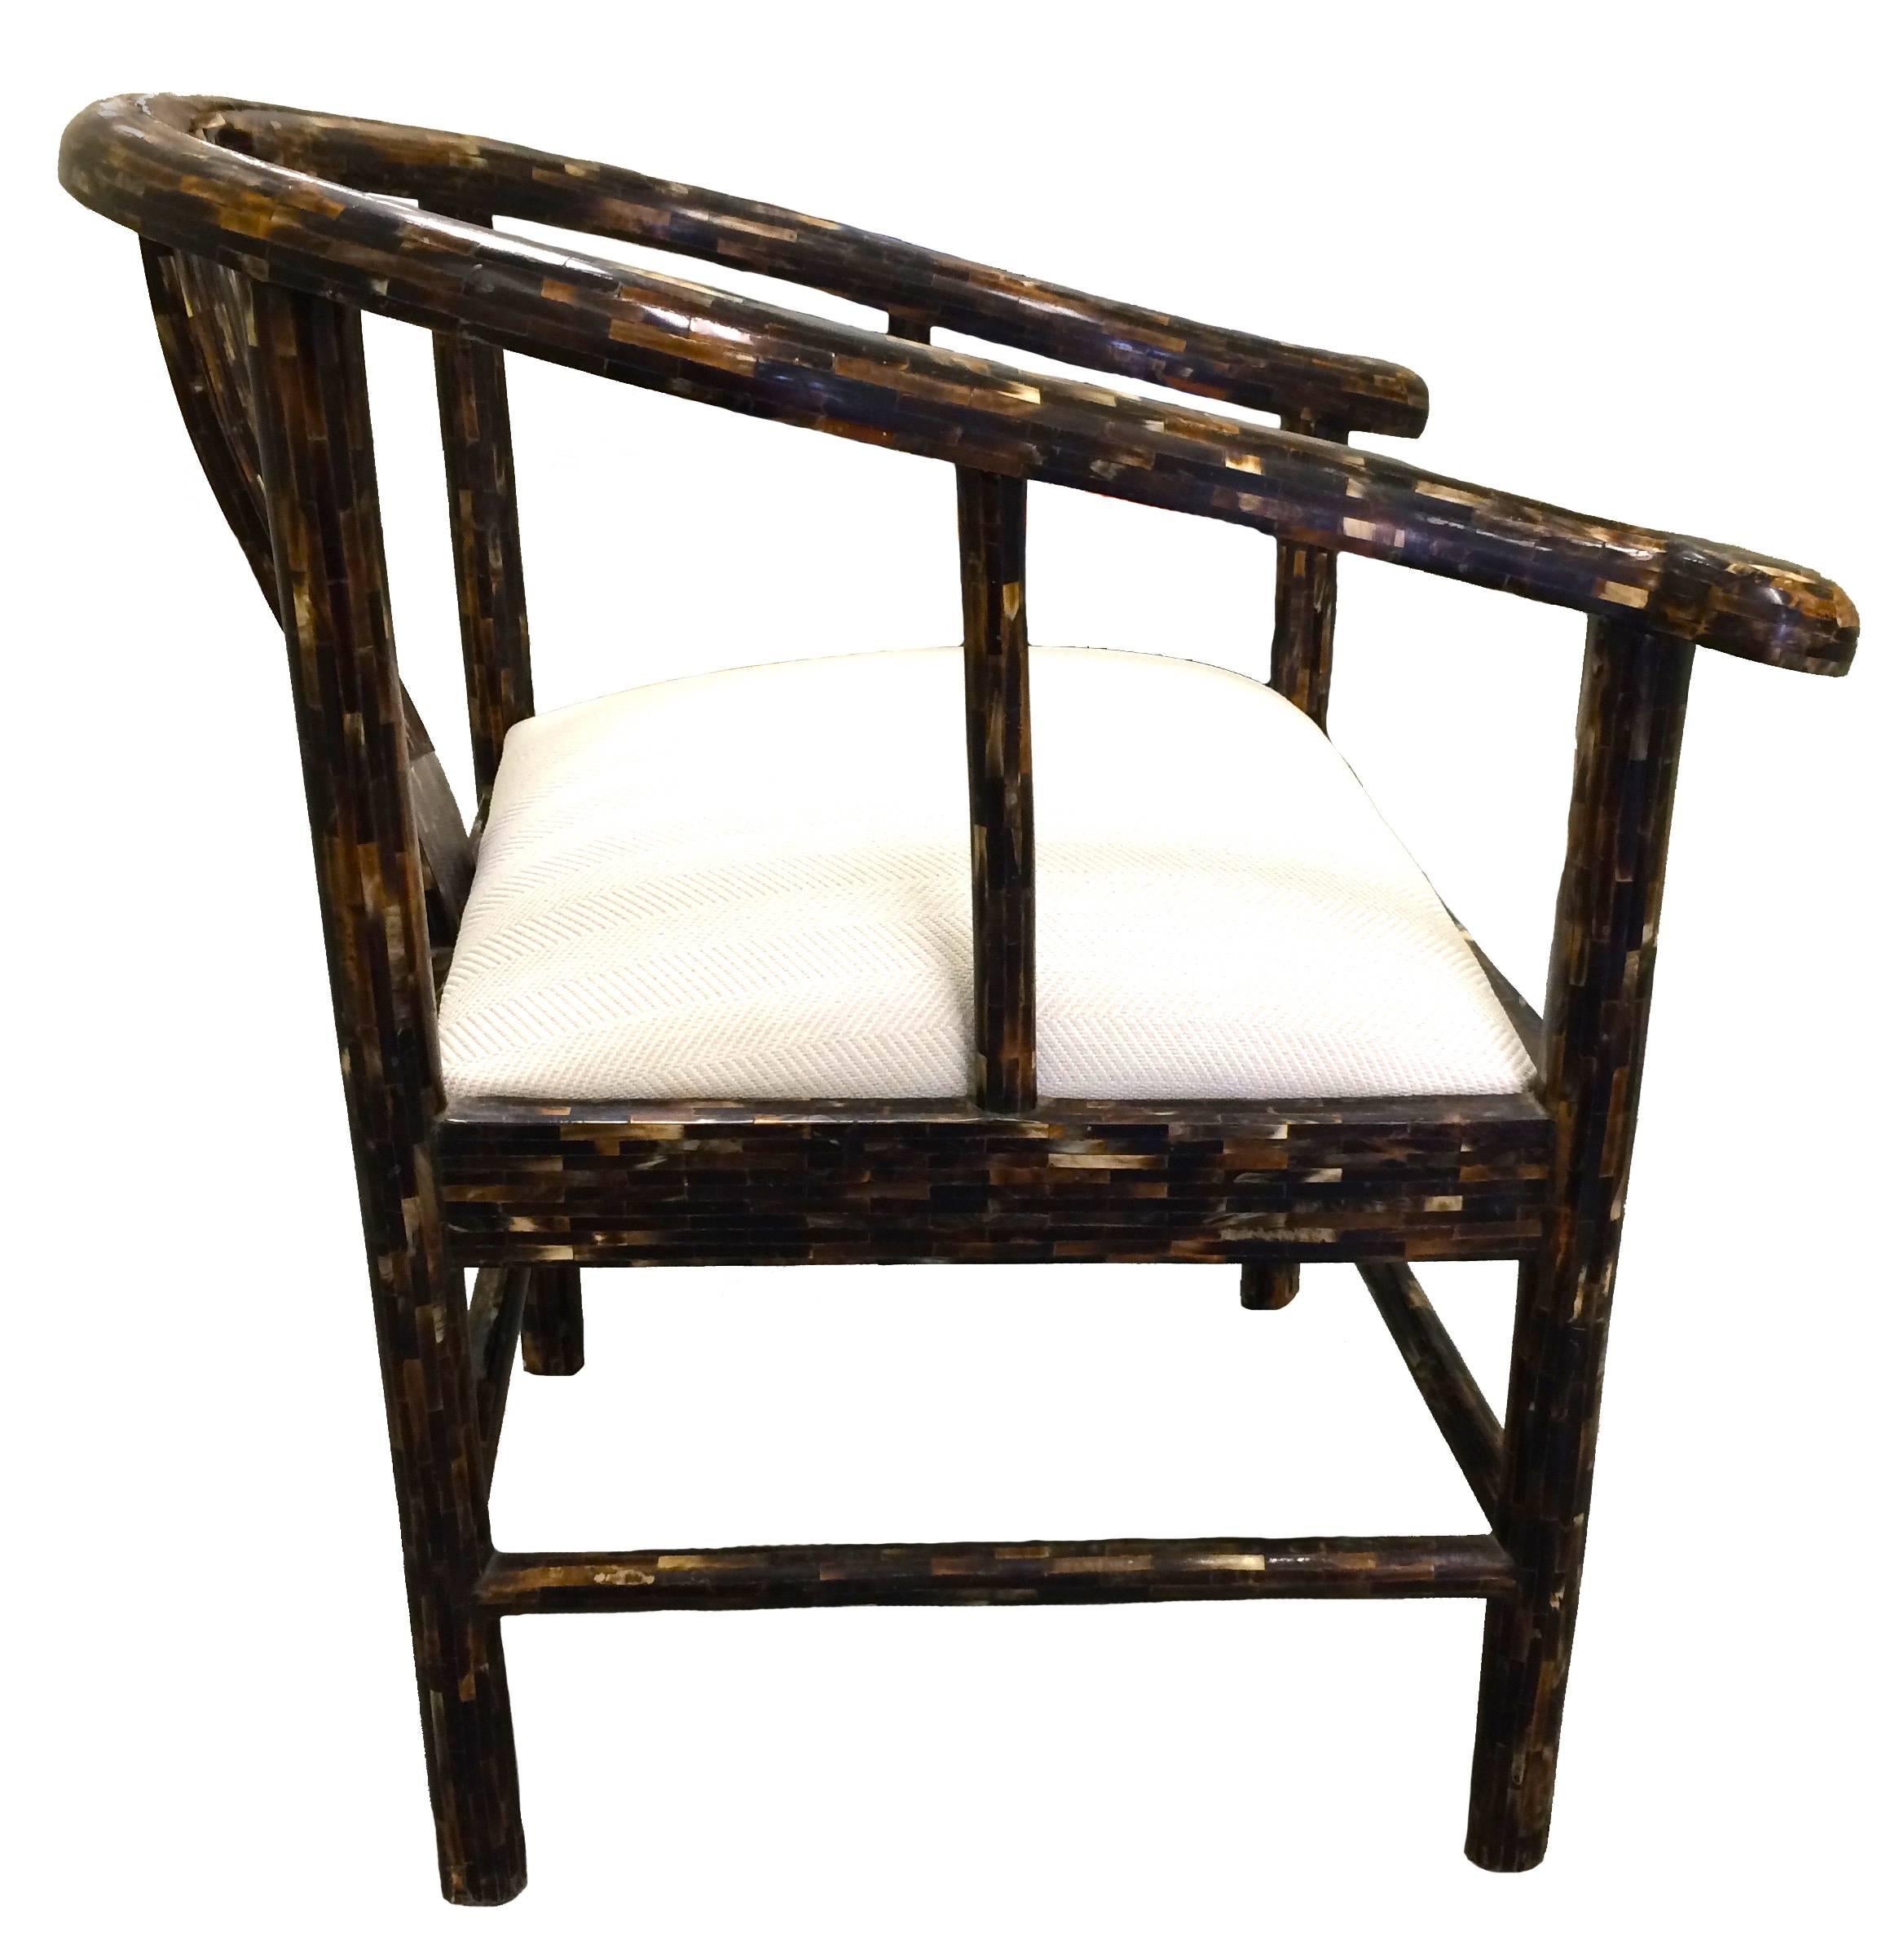 Chinoiserie Enrique Garcel Tessellated Horn Horseshoe Chair